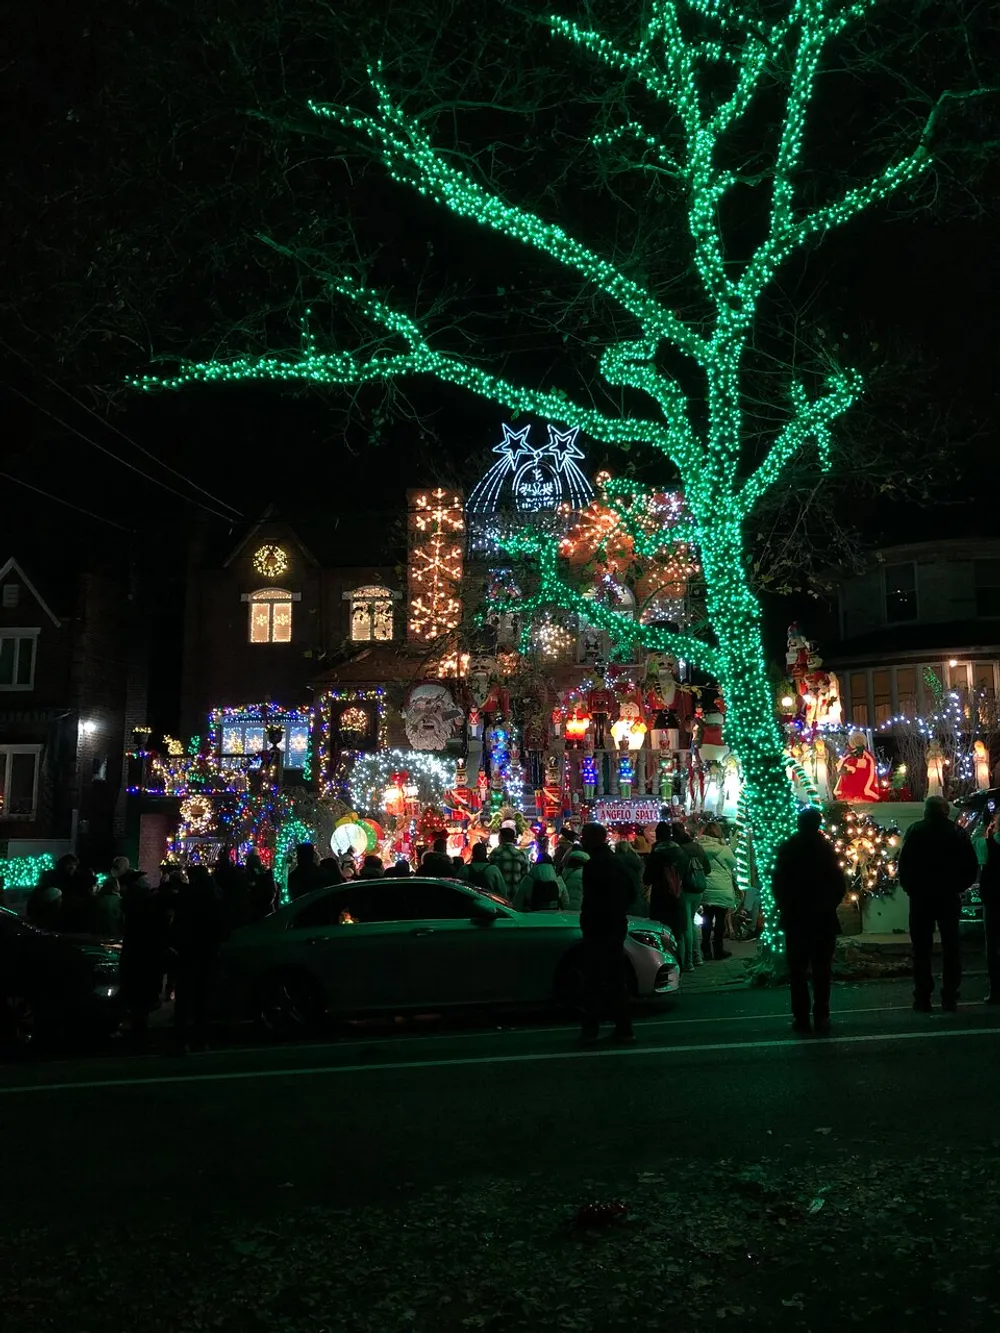 The image captures a vibrant scene of people gathered on a street at night to view a house and tree elaborately decorated with festive Christmas lights